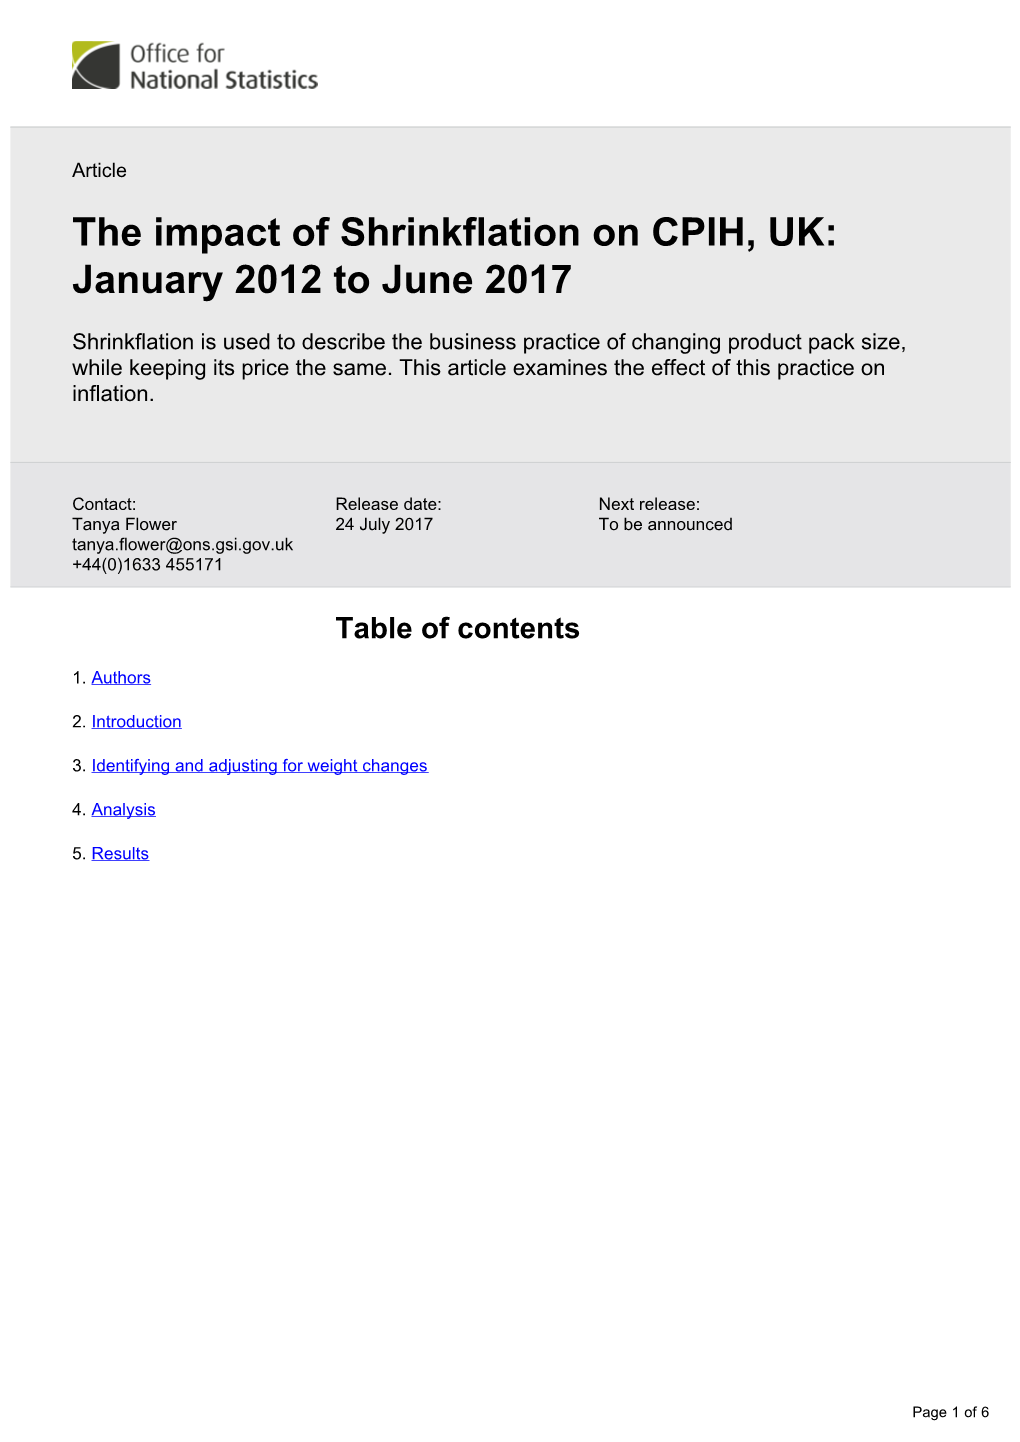 The Impact of Shrinkflation on CPIH, UK: January 2012 to June 2017